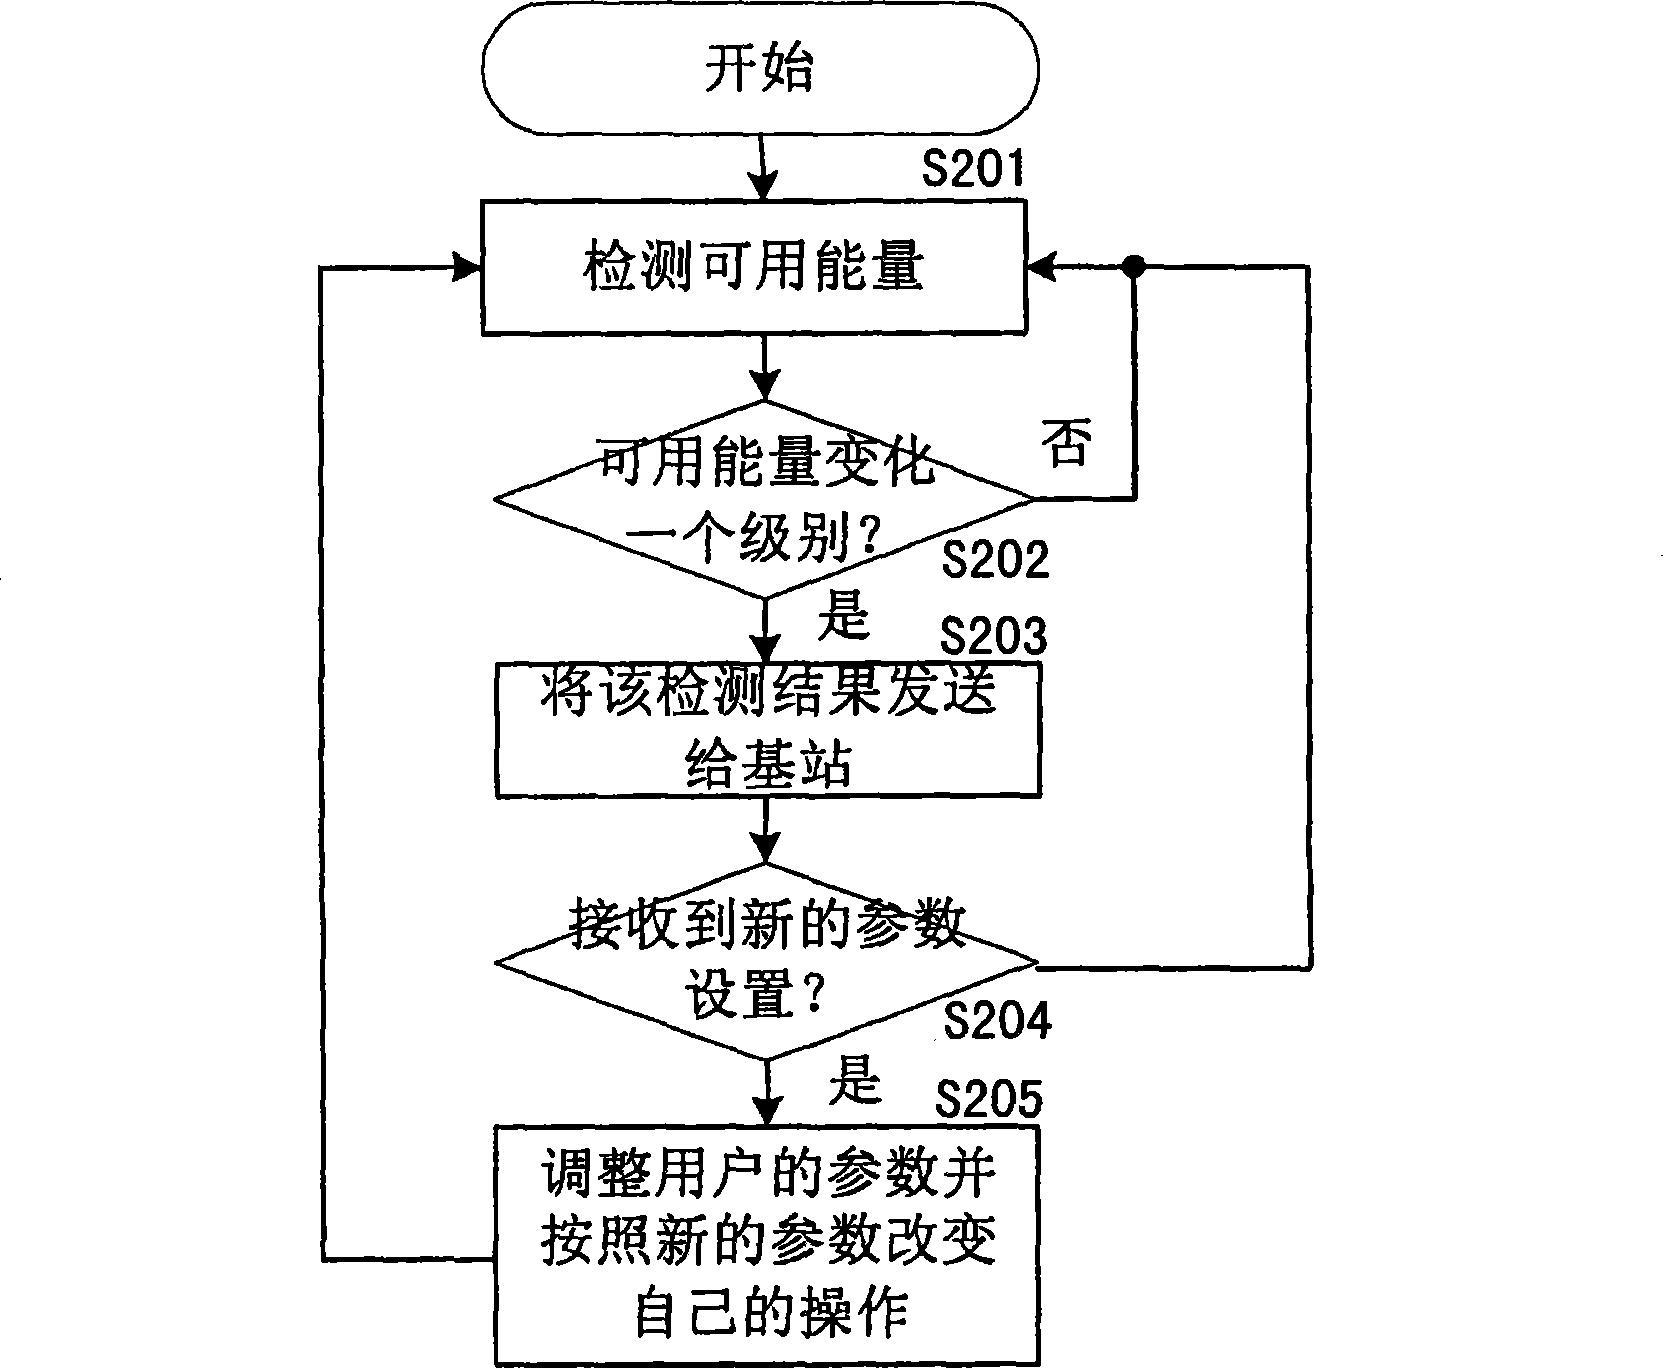 Method and apparatus for setting parameter according to available energy of user equipment